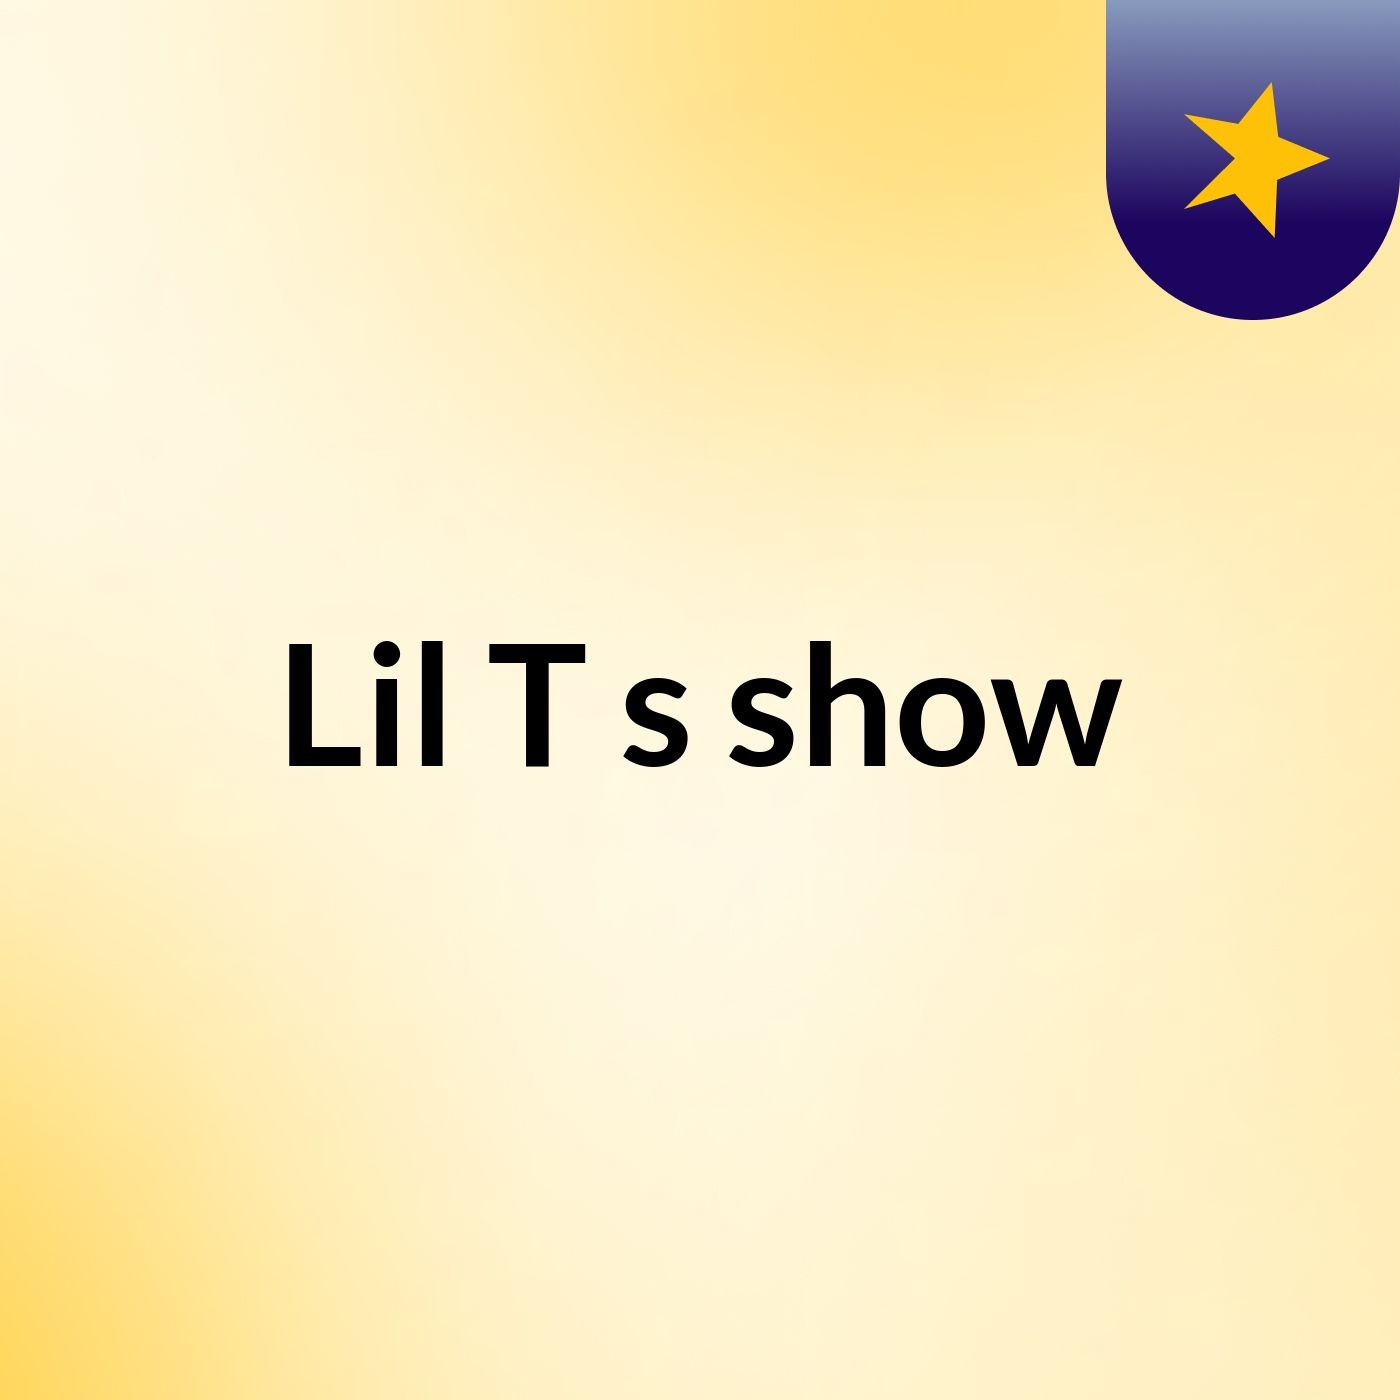 Lil T's show